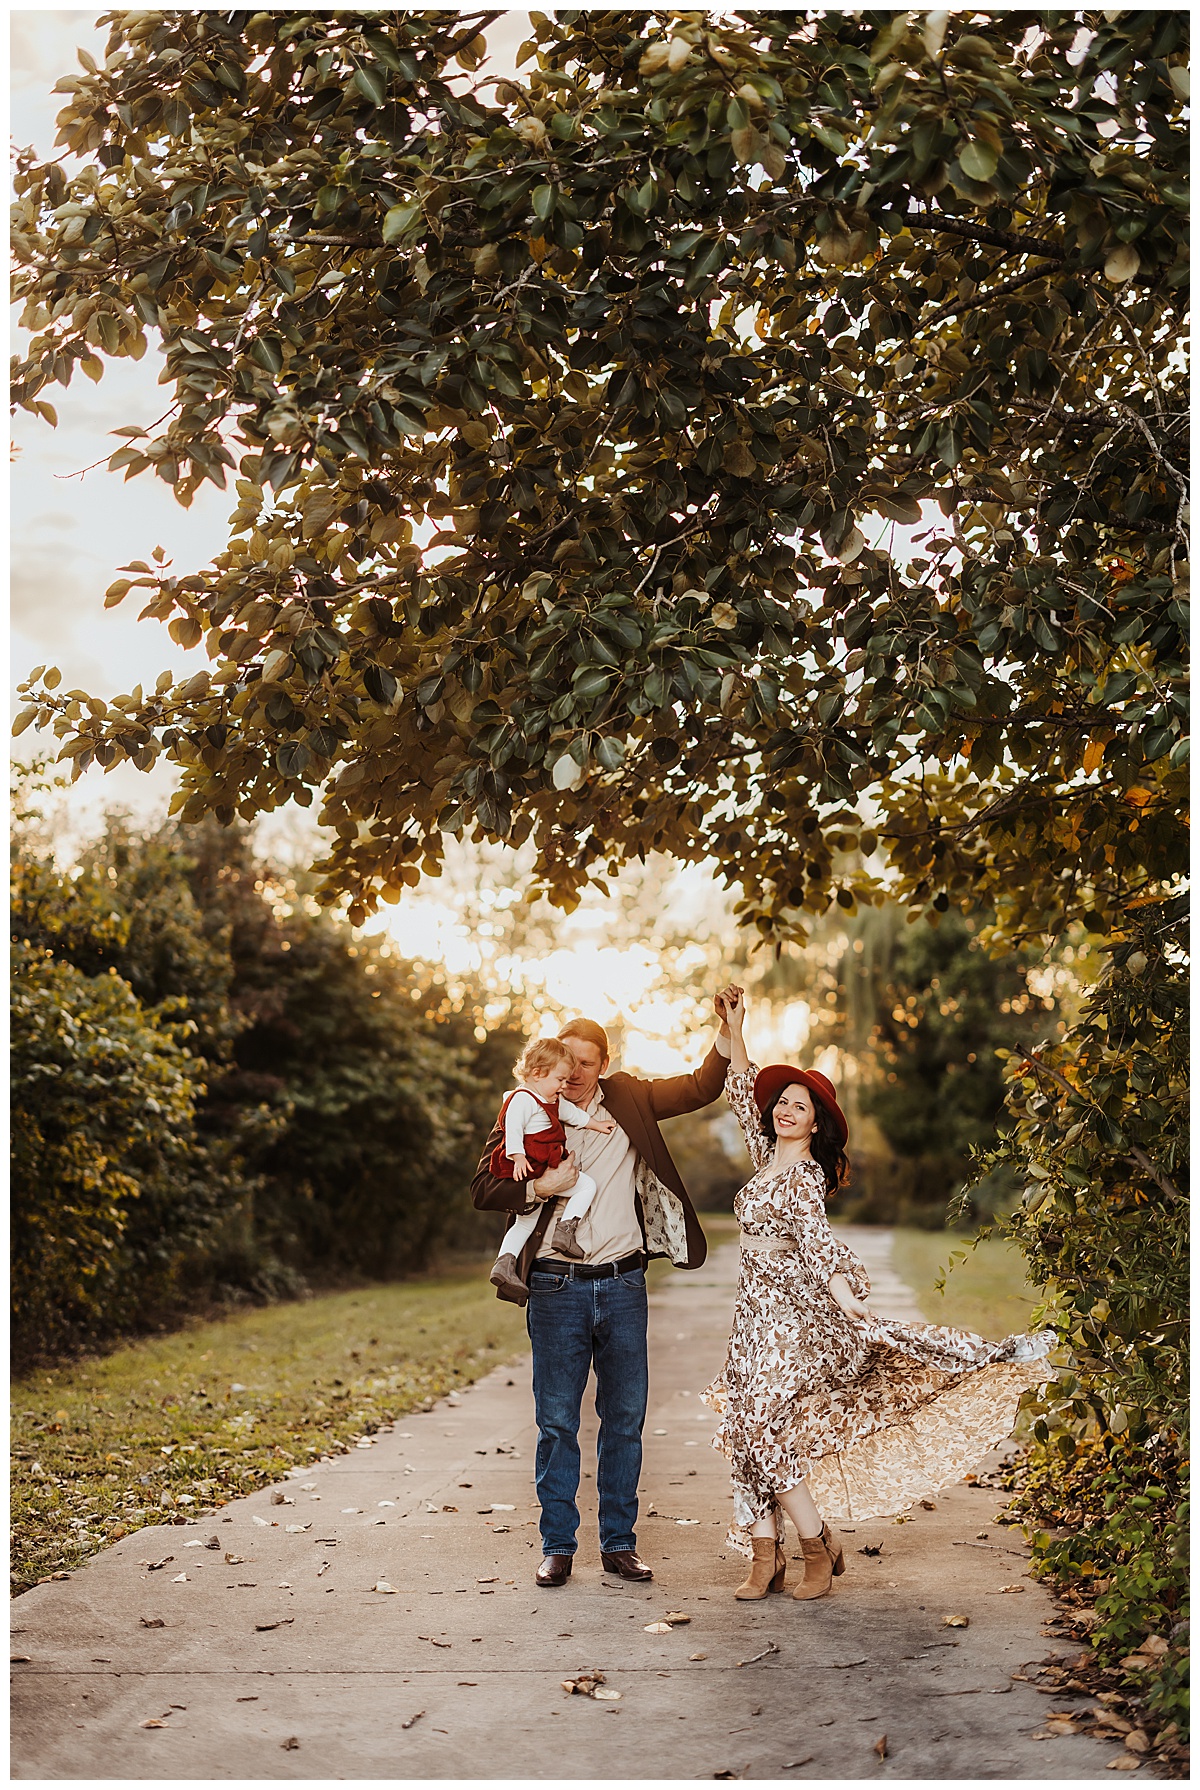 Dad and mom walk down the path together for Virginia Family Photographer